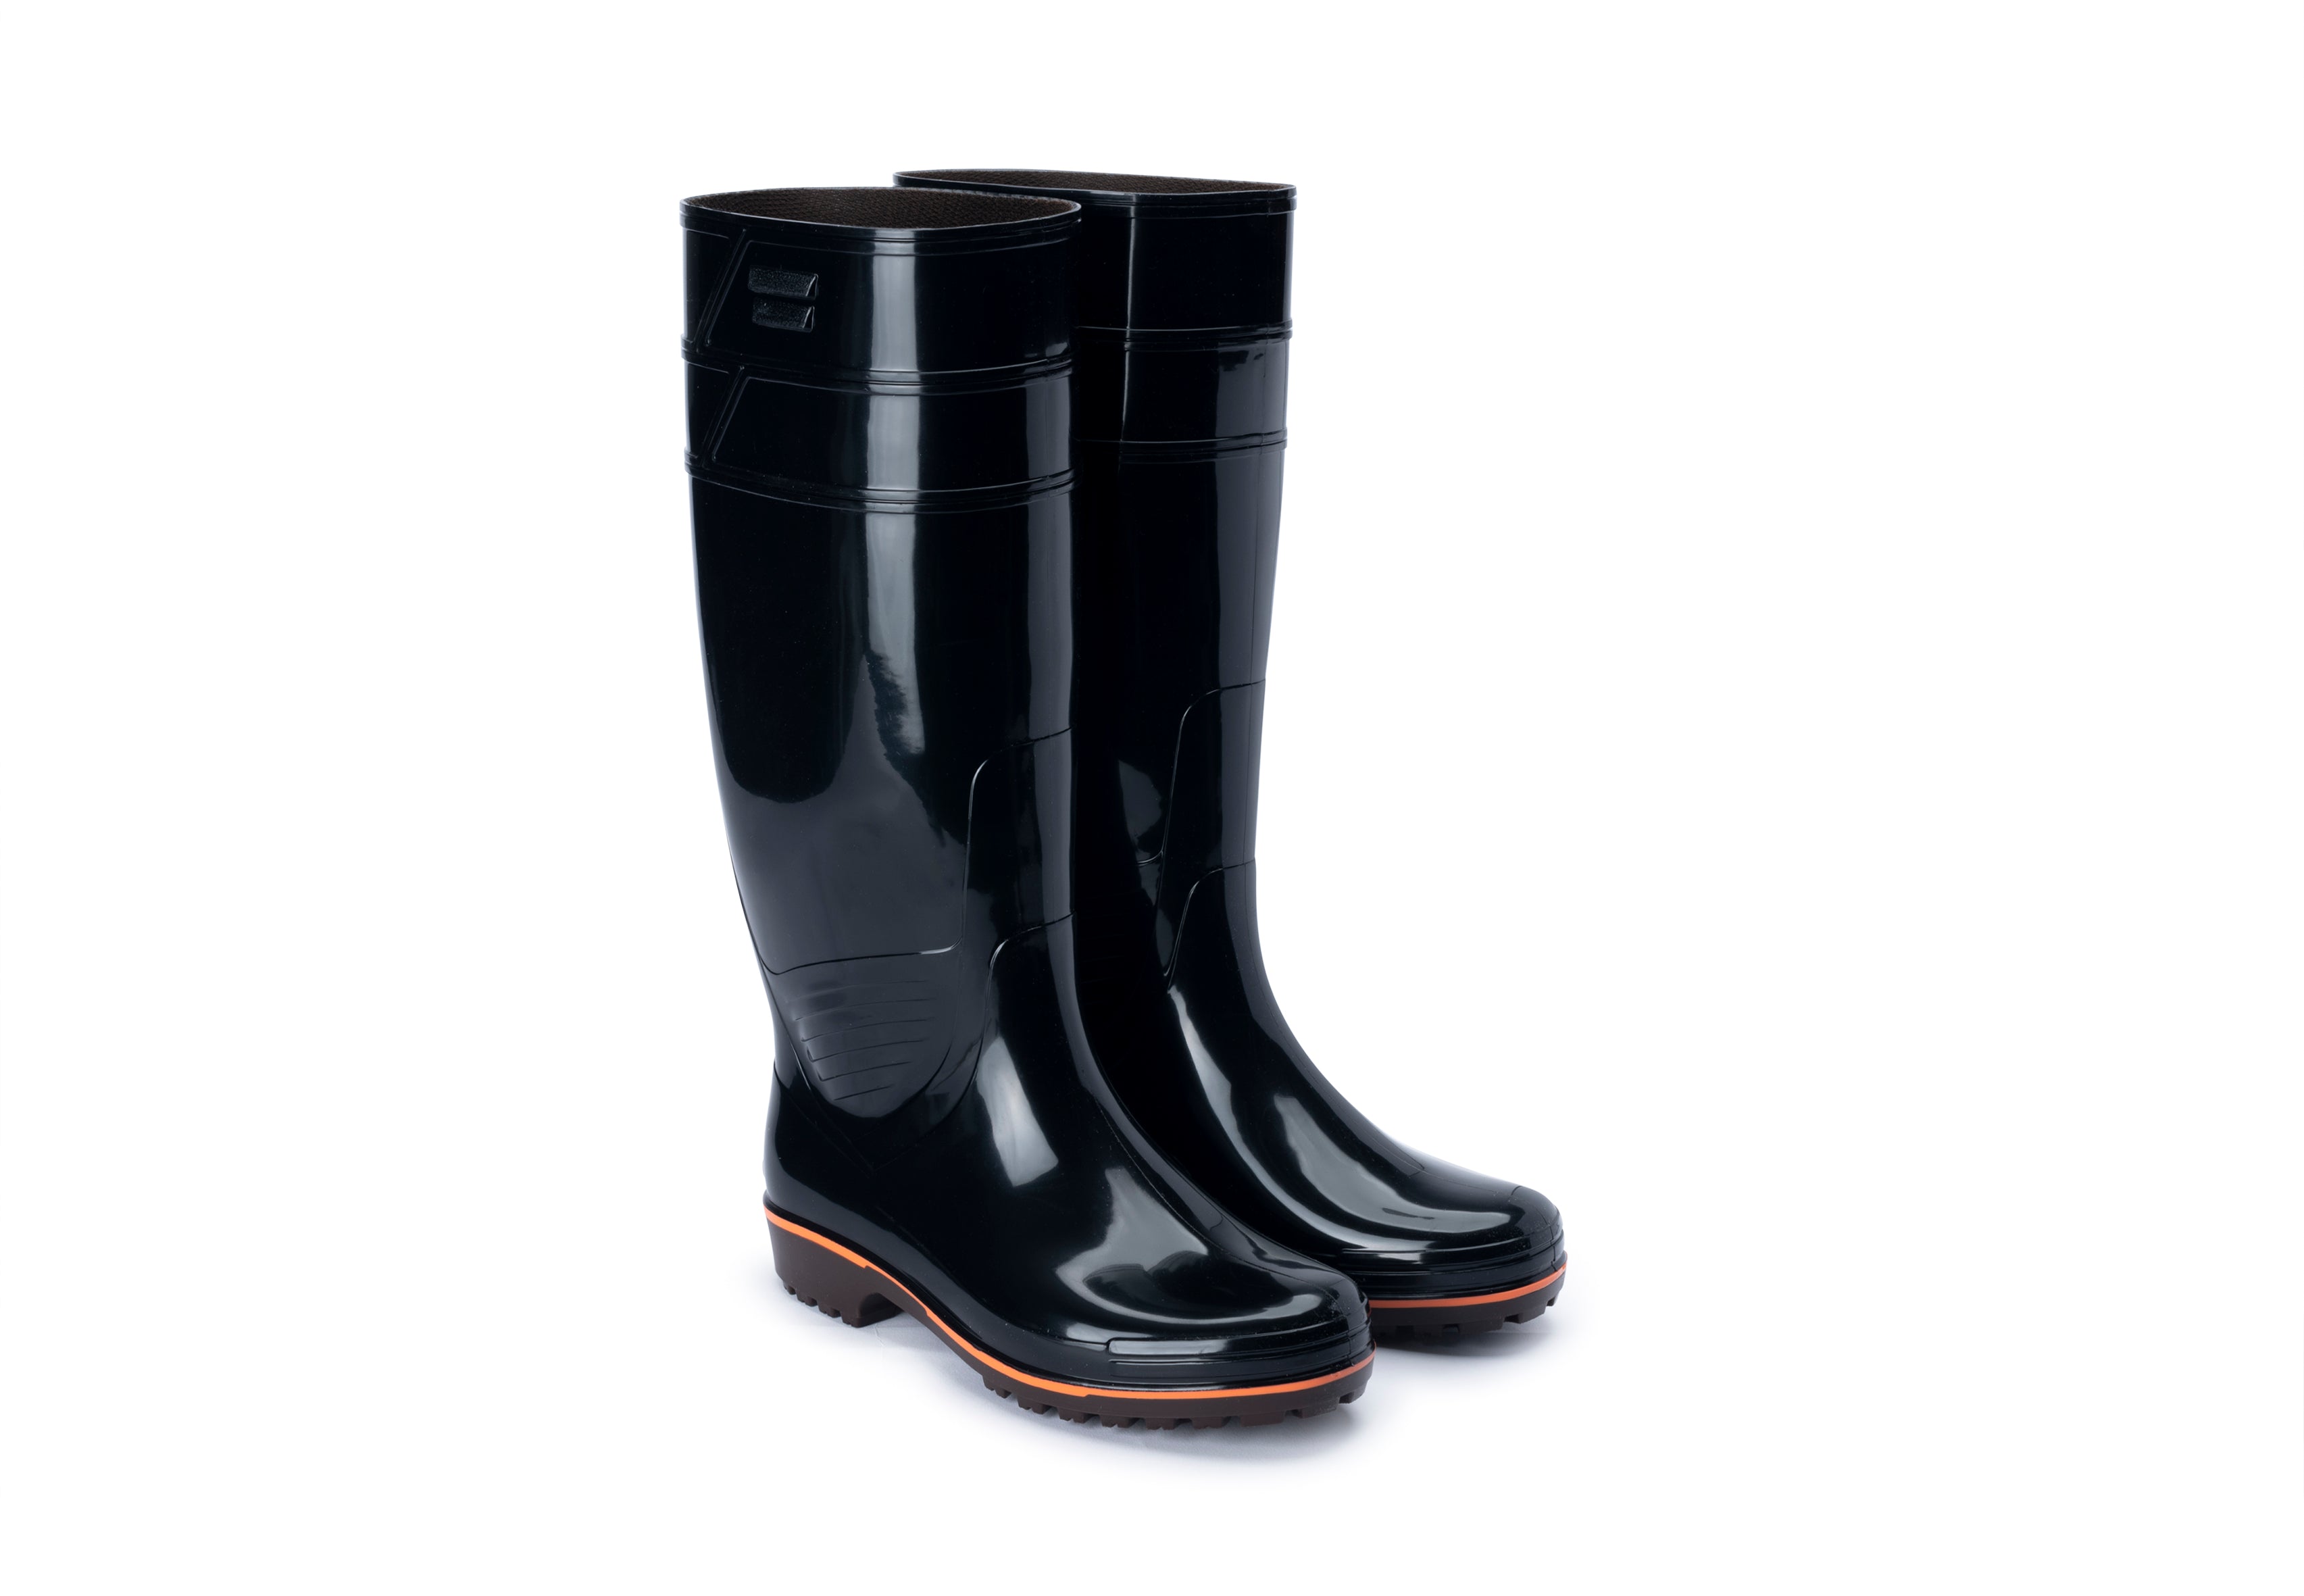 40CM Extra High Rain Boots (Top Sales in Japan)